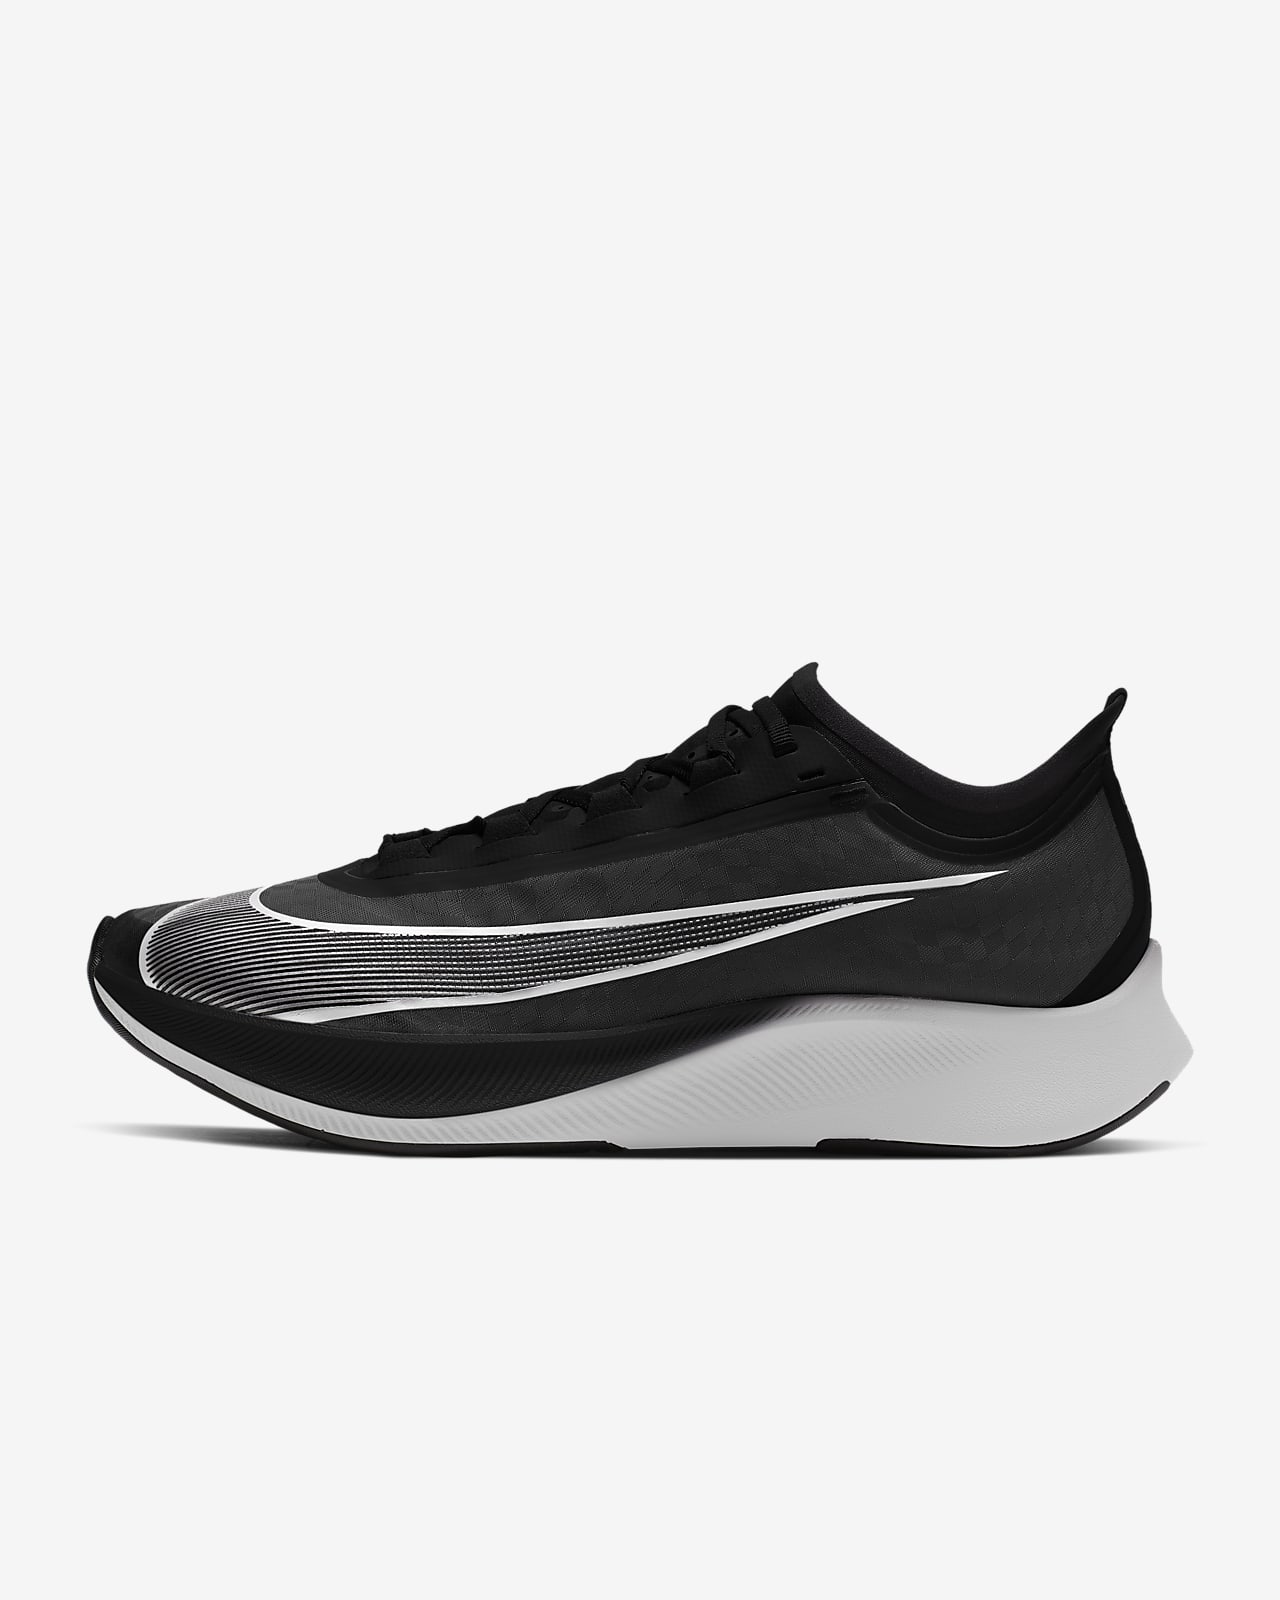 nike zoom fly 3 men's running shoes